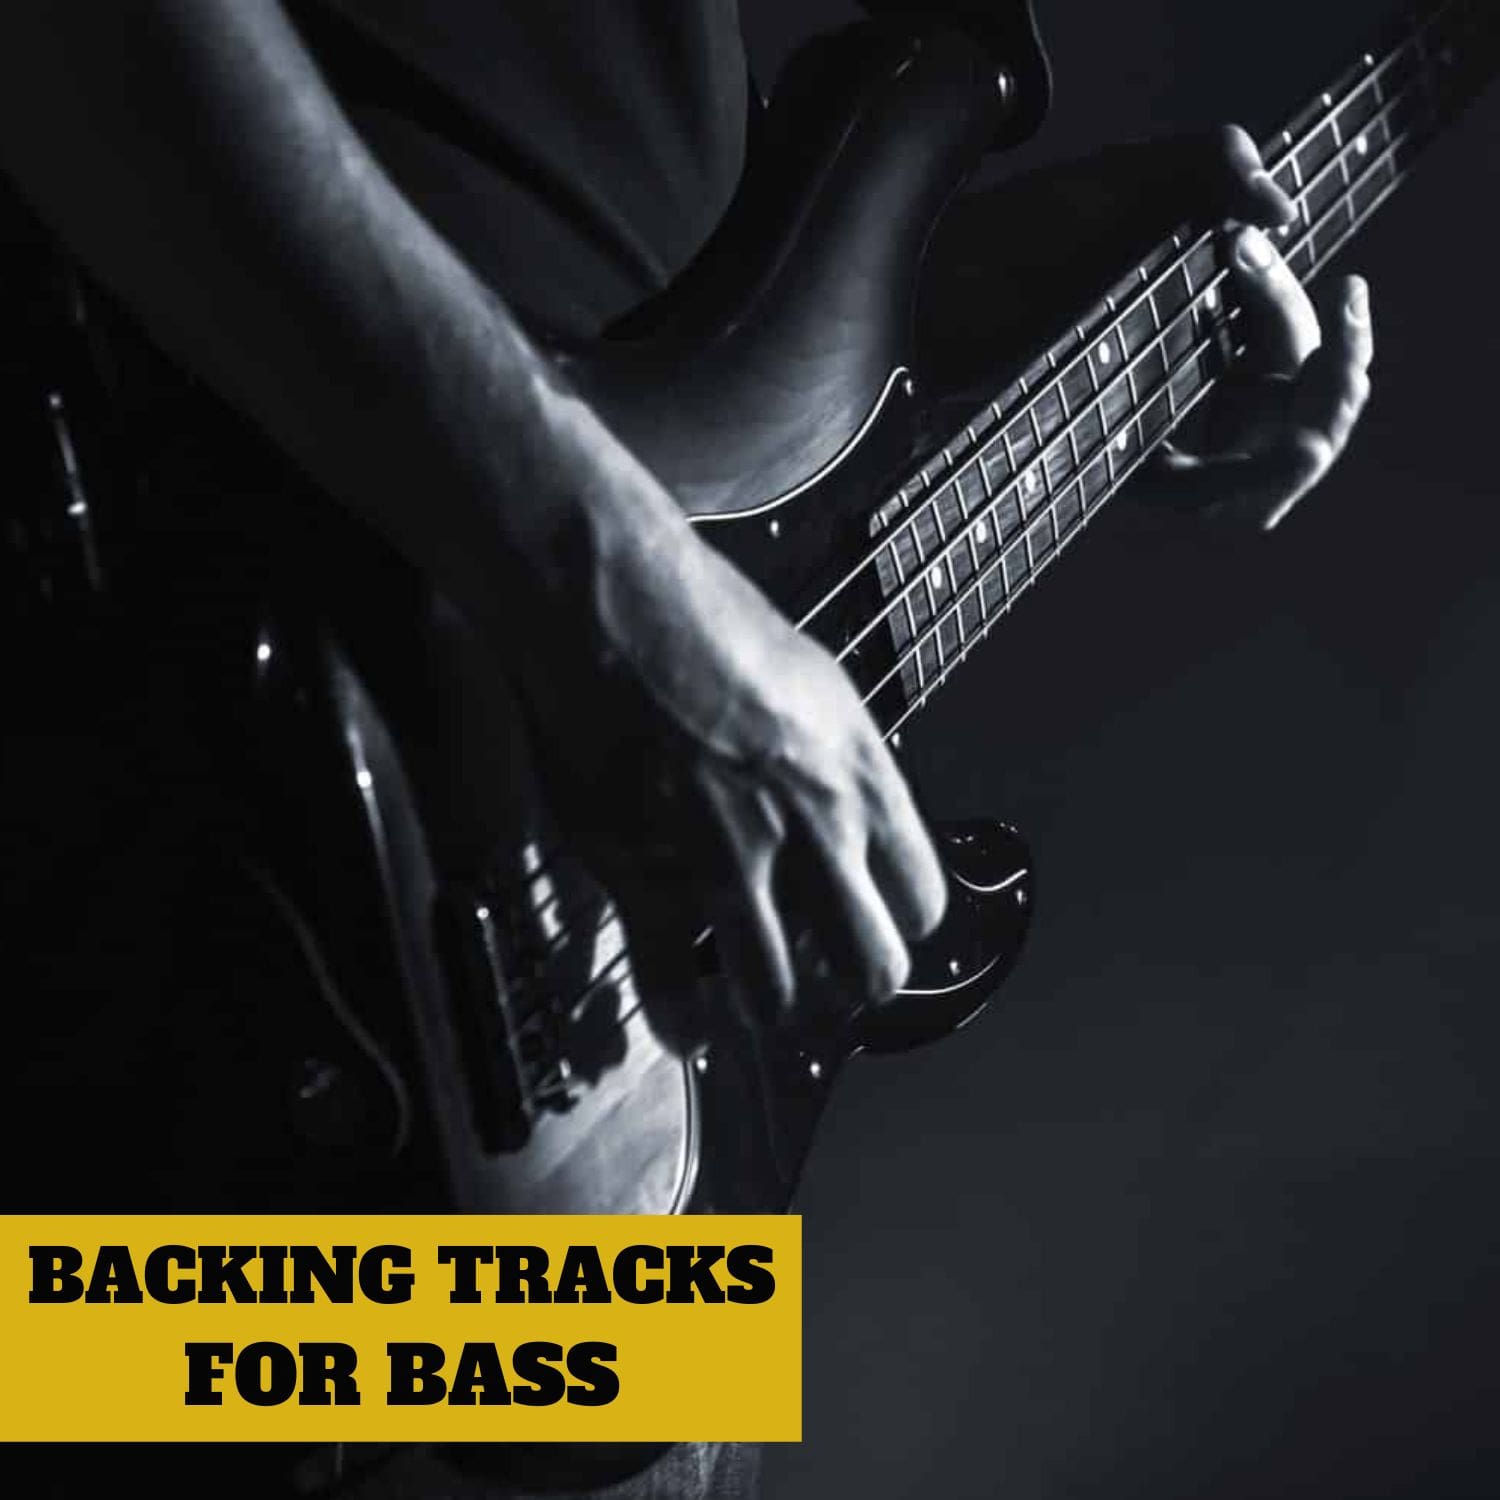 Backing tracks for Bass